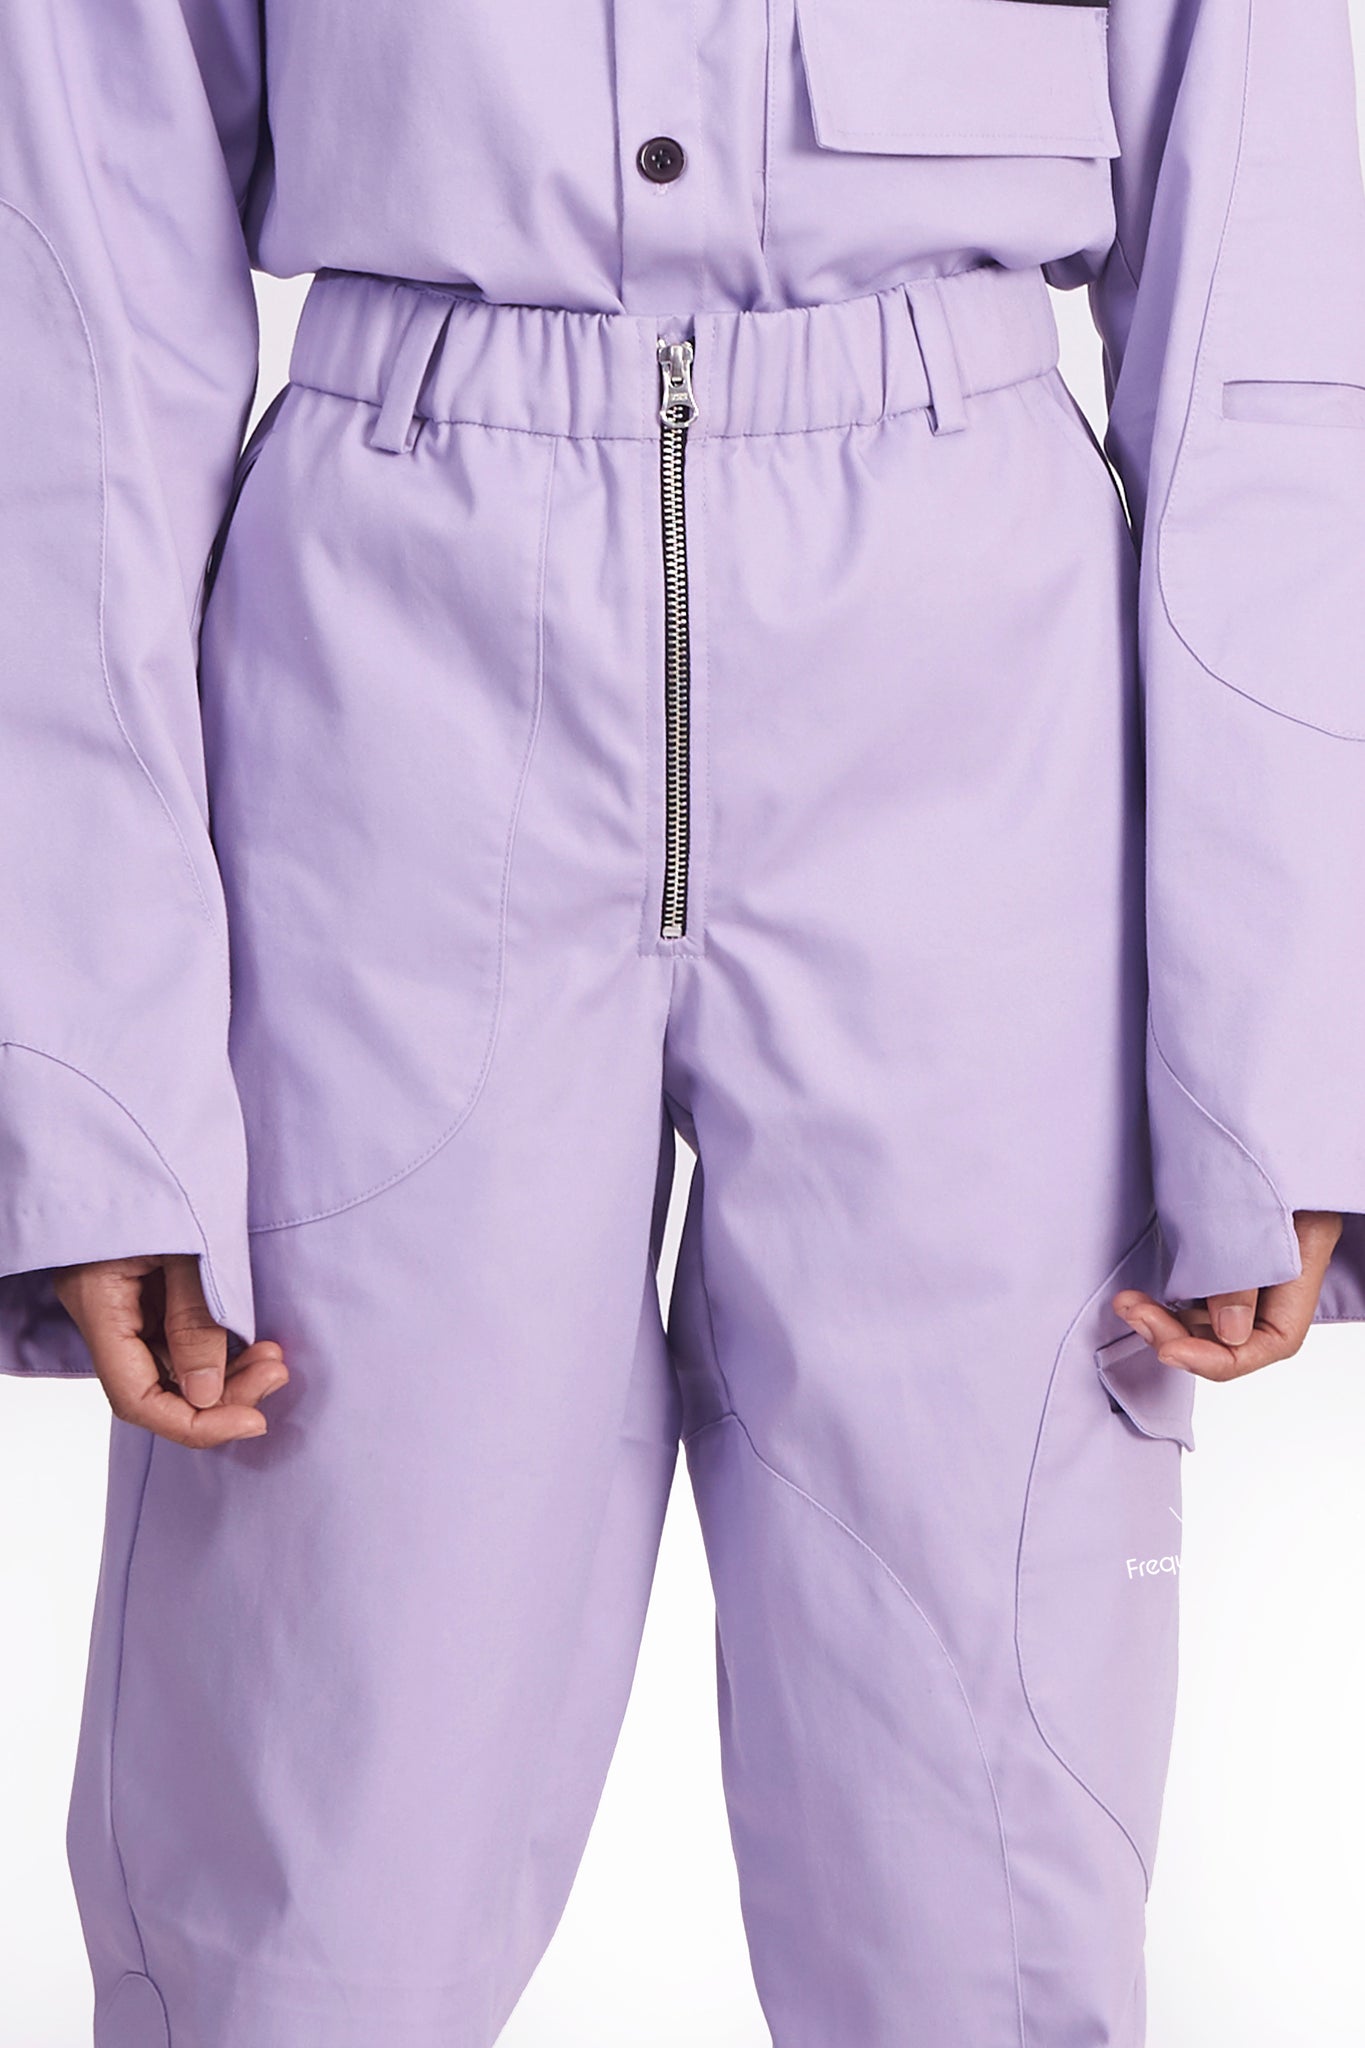 Frequency Lavender Pant